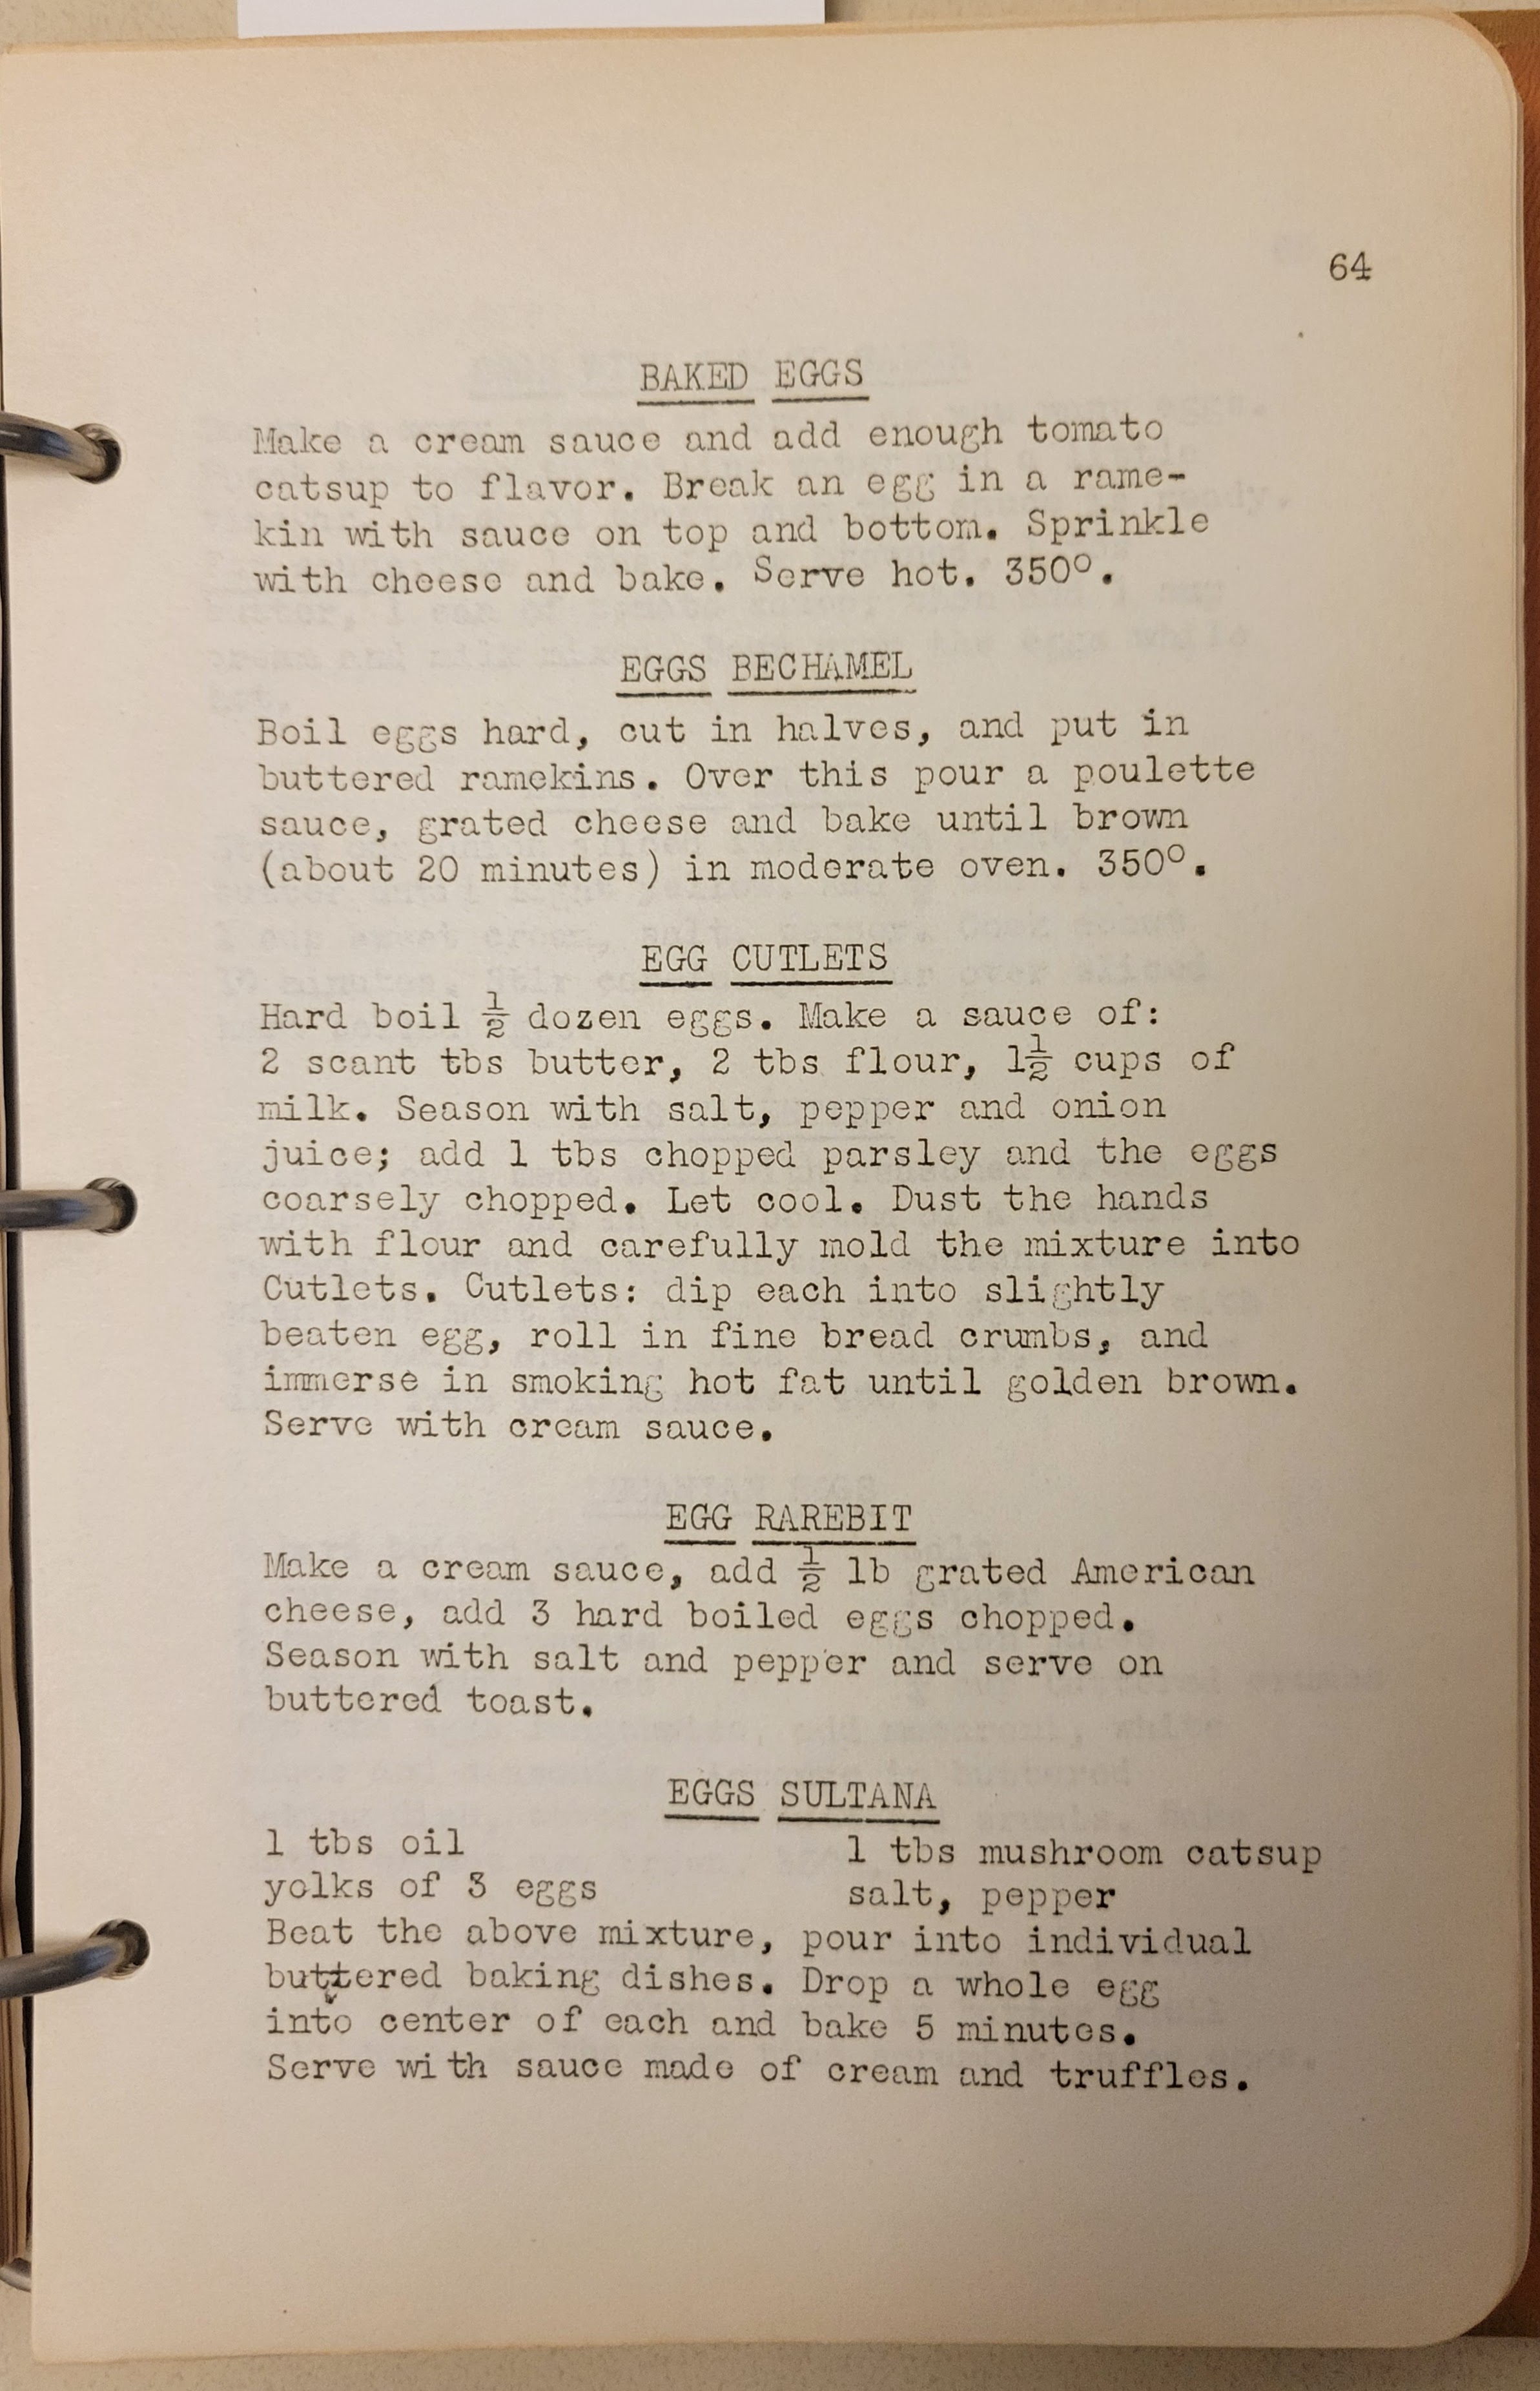 typewritten page in a 3-ring binder with recipes for several egg dishes including baked eggs, eggs bechamel and egg cutlets